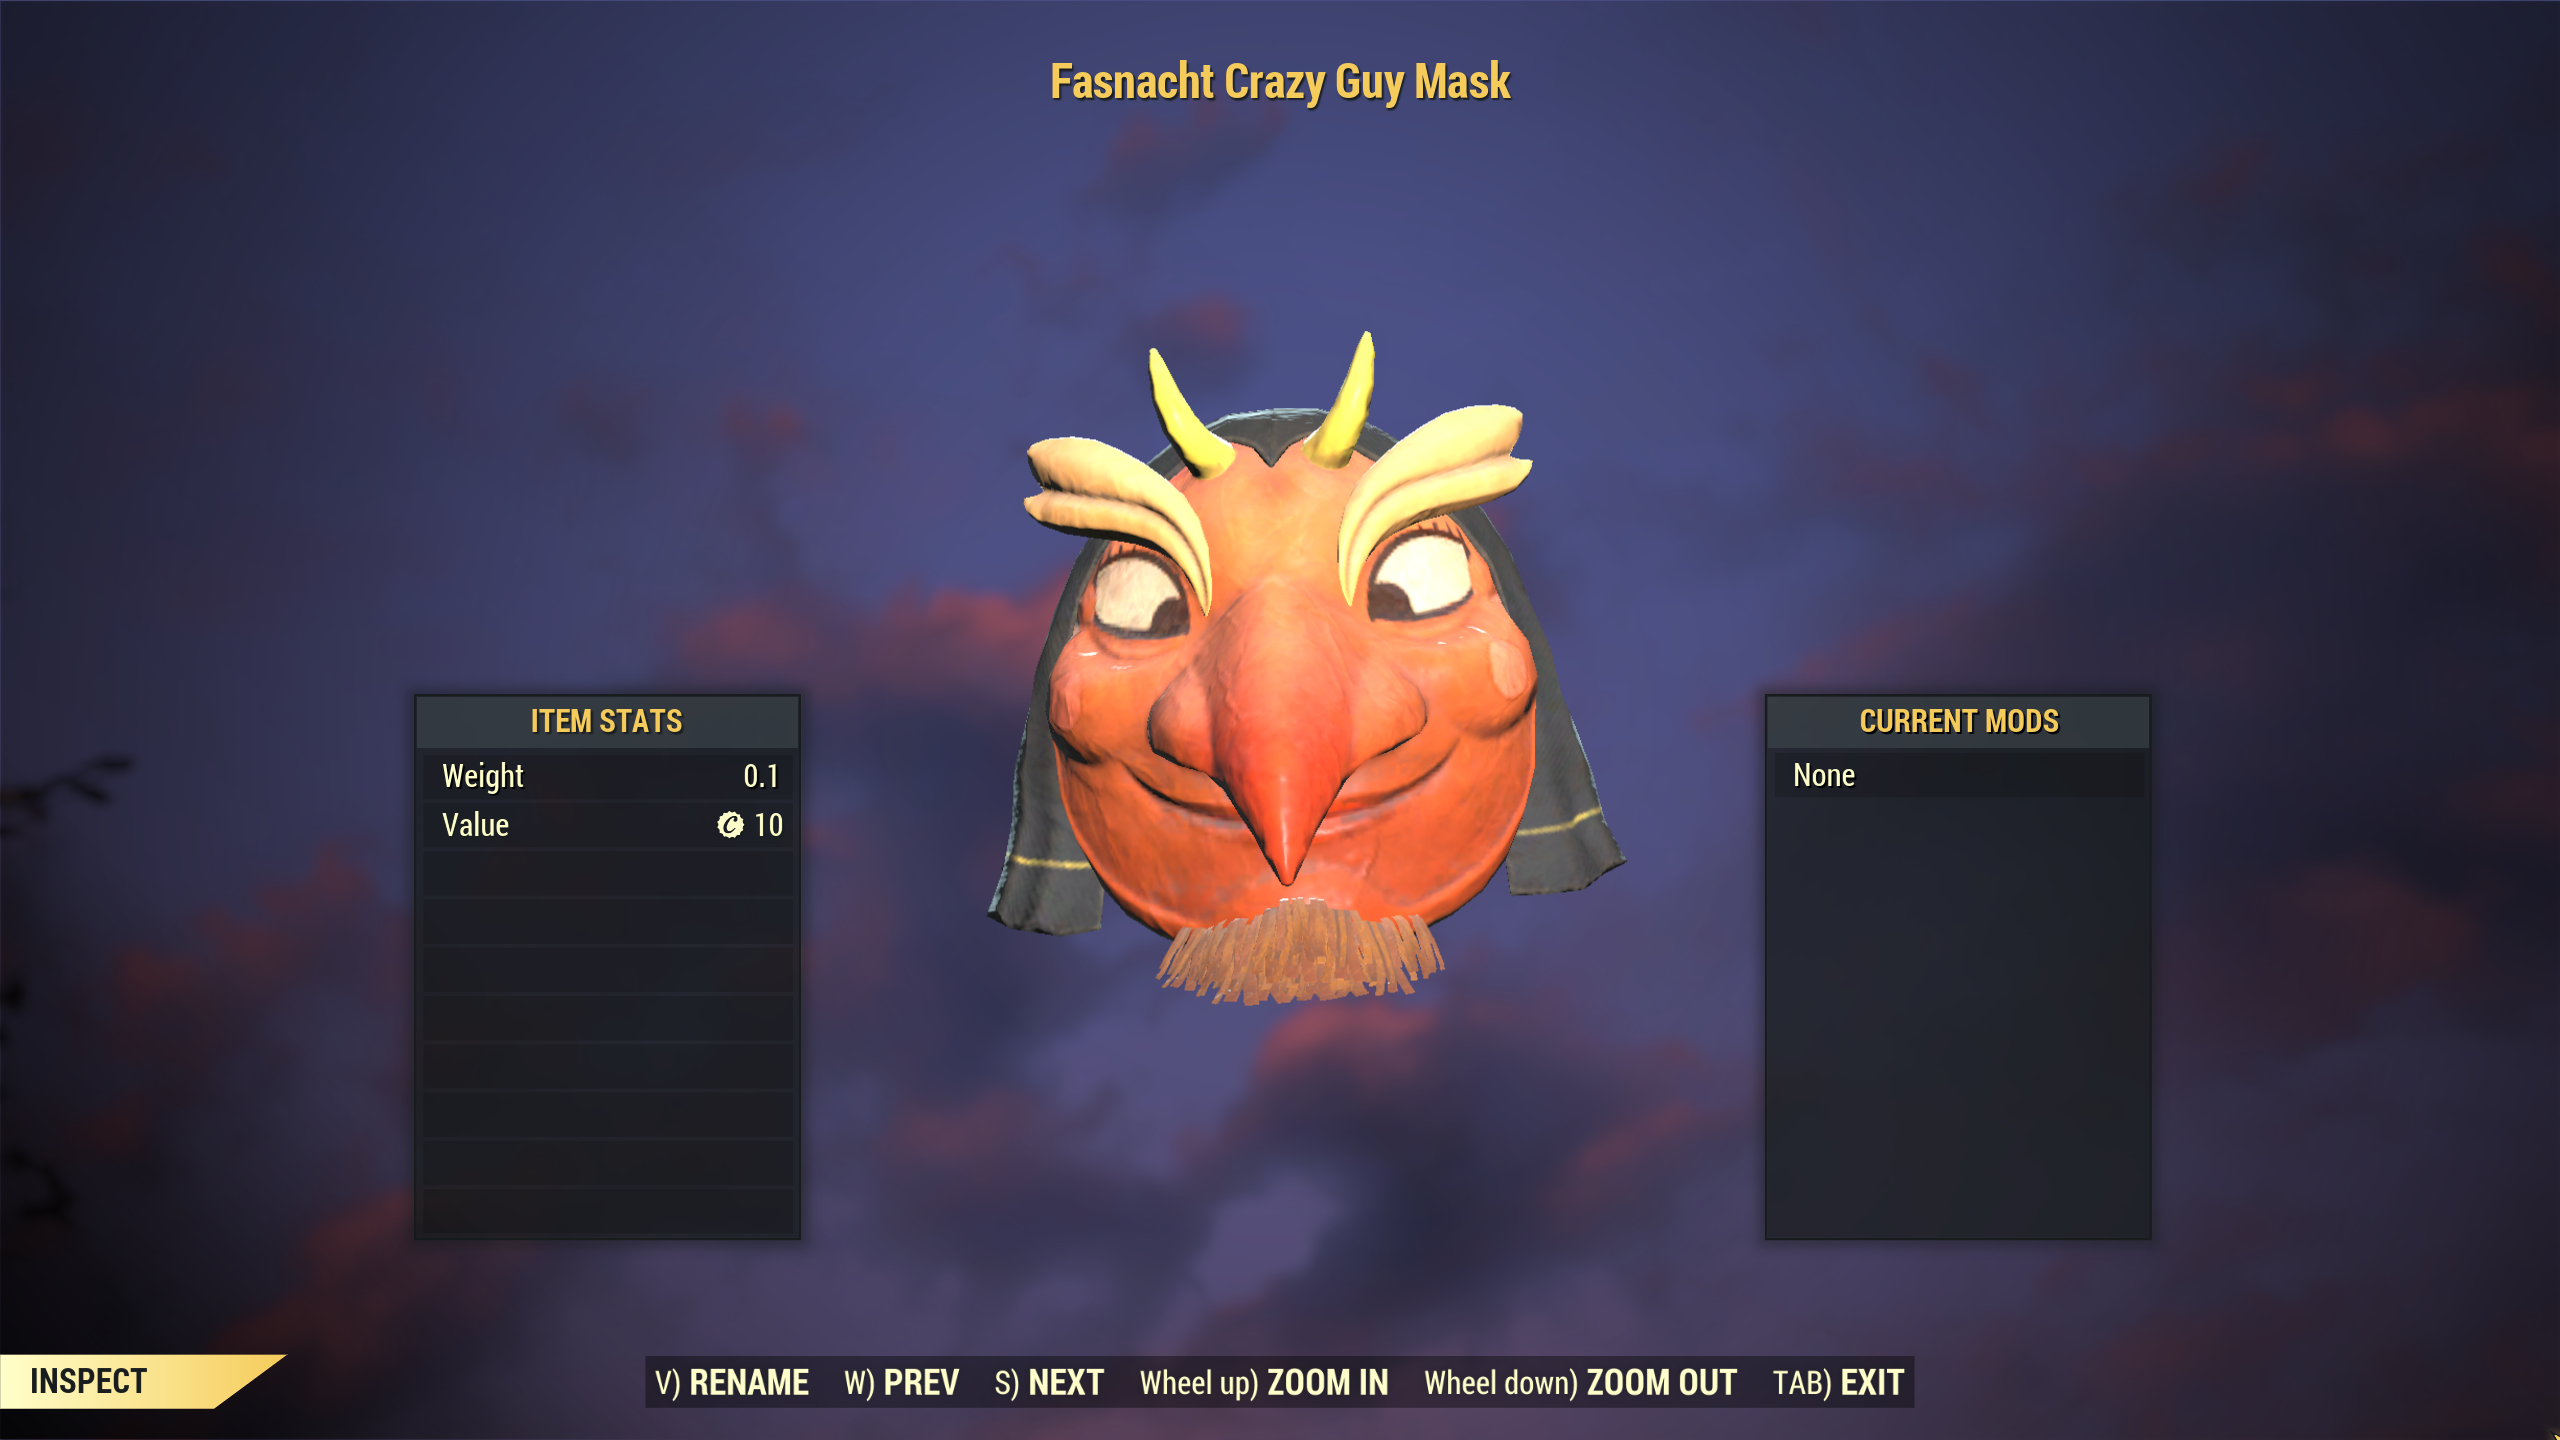 [ULTRA RARE][NEW] Fasnacht Crazy Guy Mask | FAST DELIVERY |